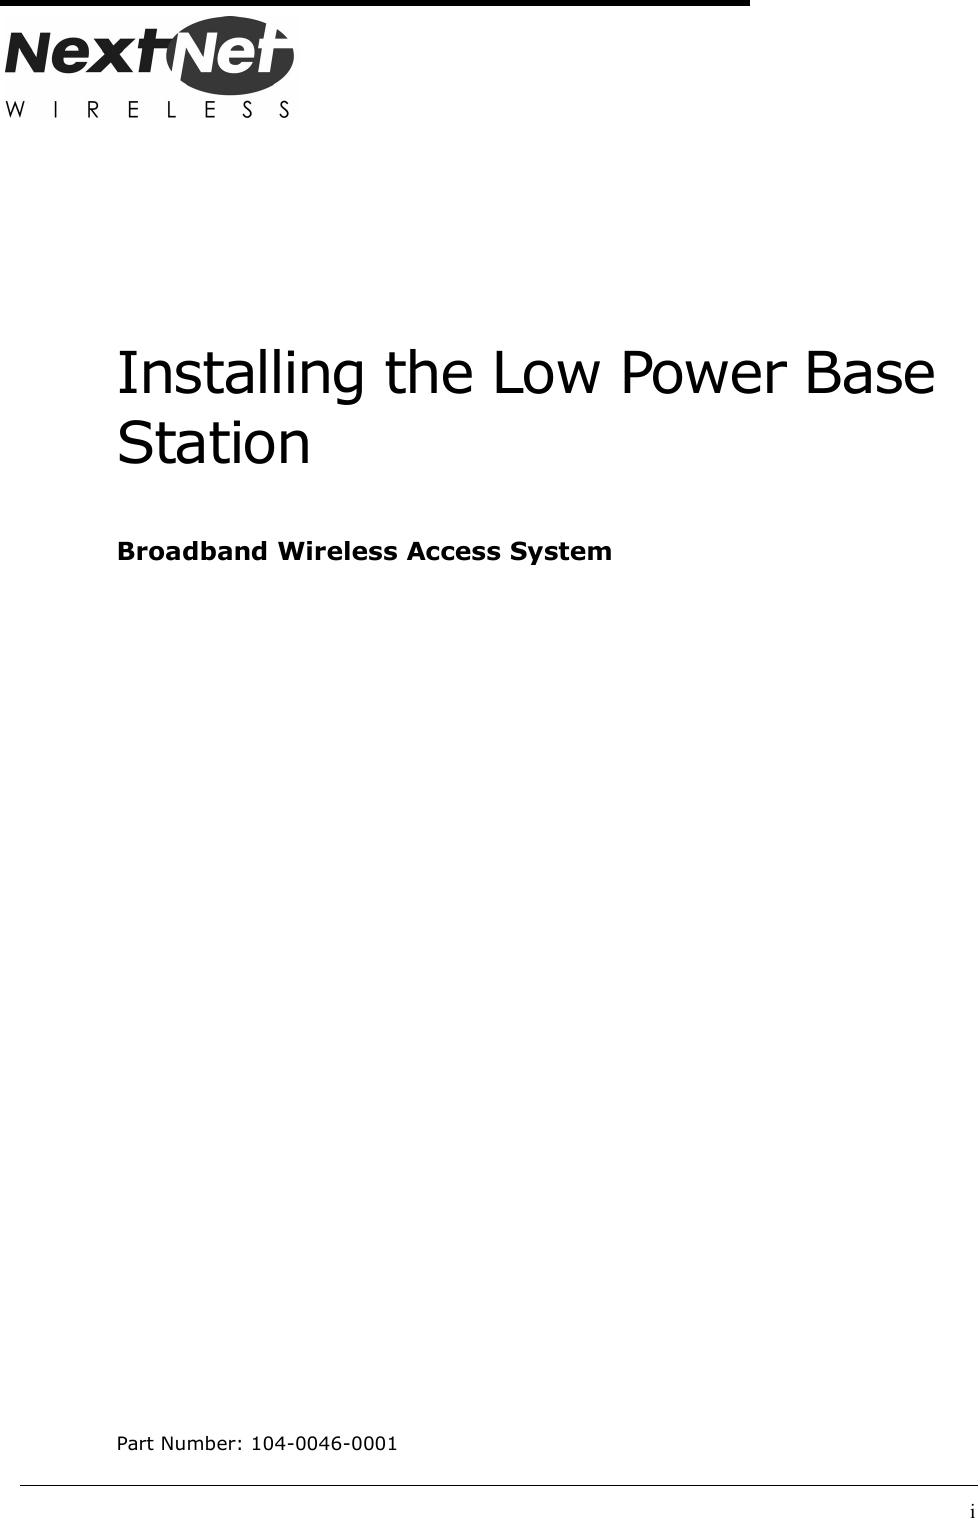 iInstalling the Low Power Base StationBroadband Wireless Access SystemPart Number: 104-0046-0001